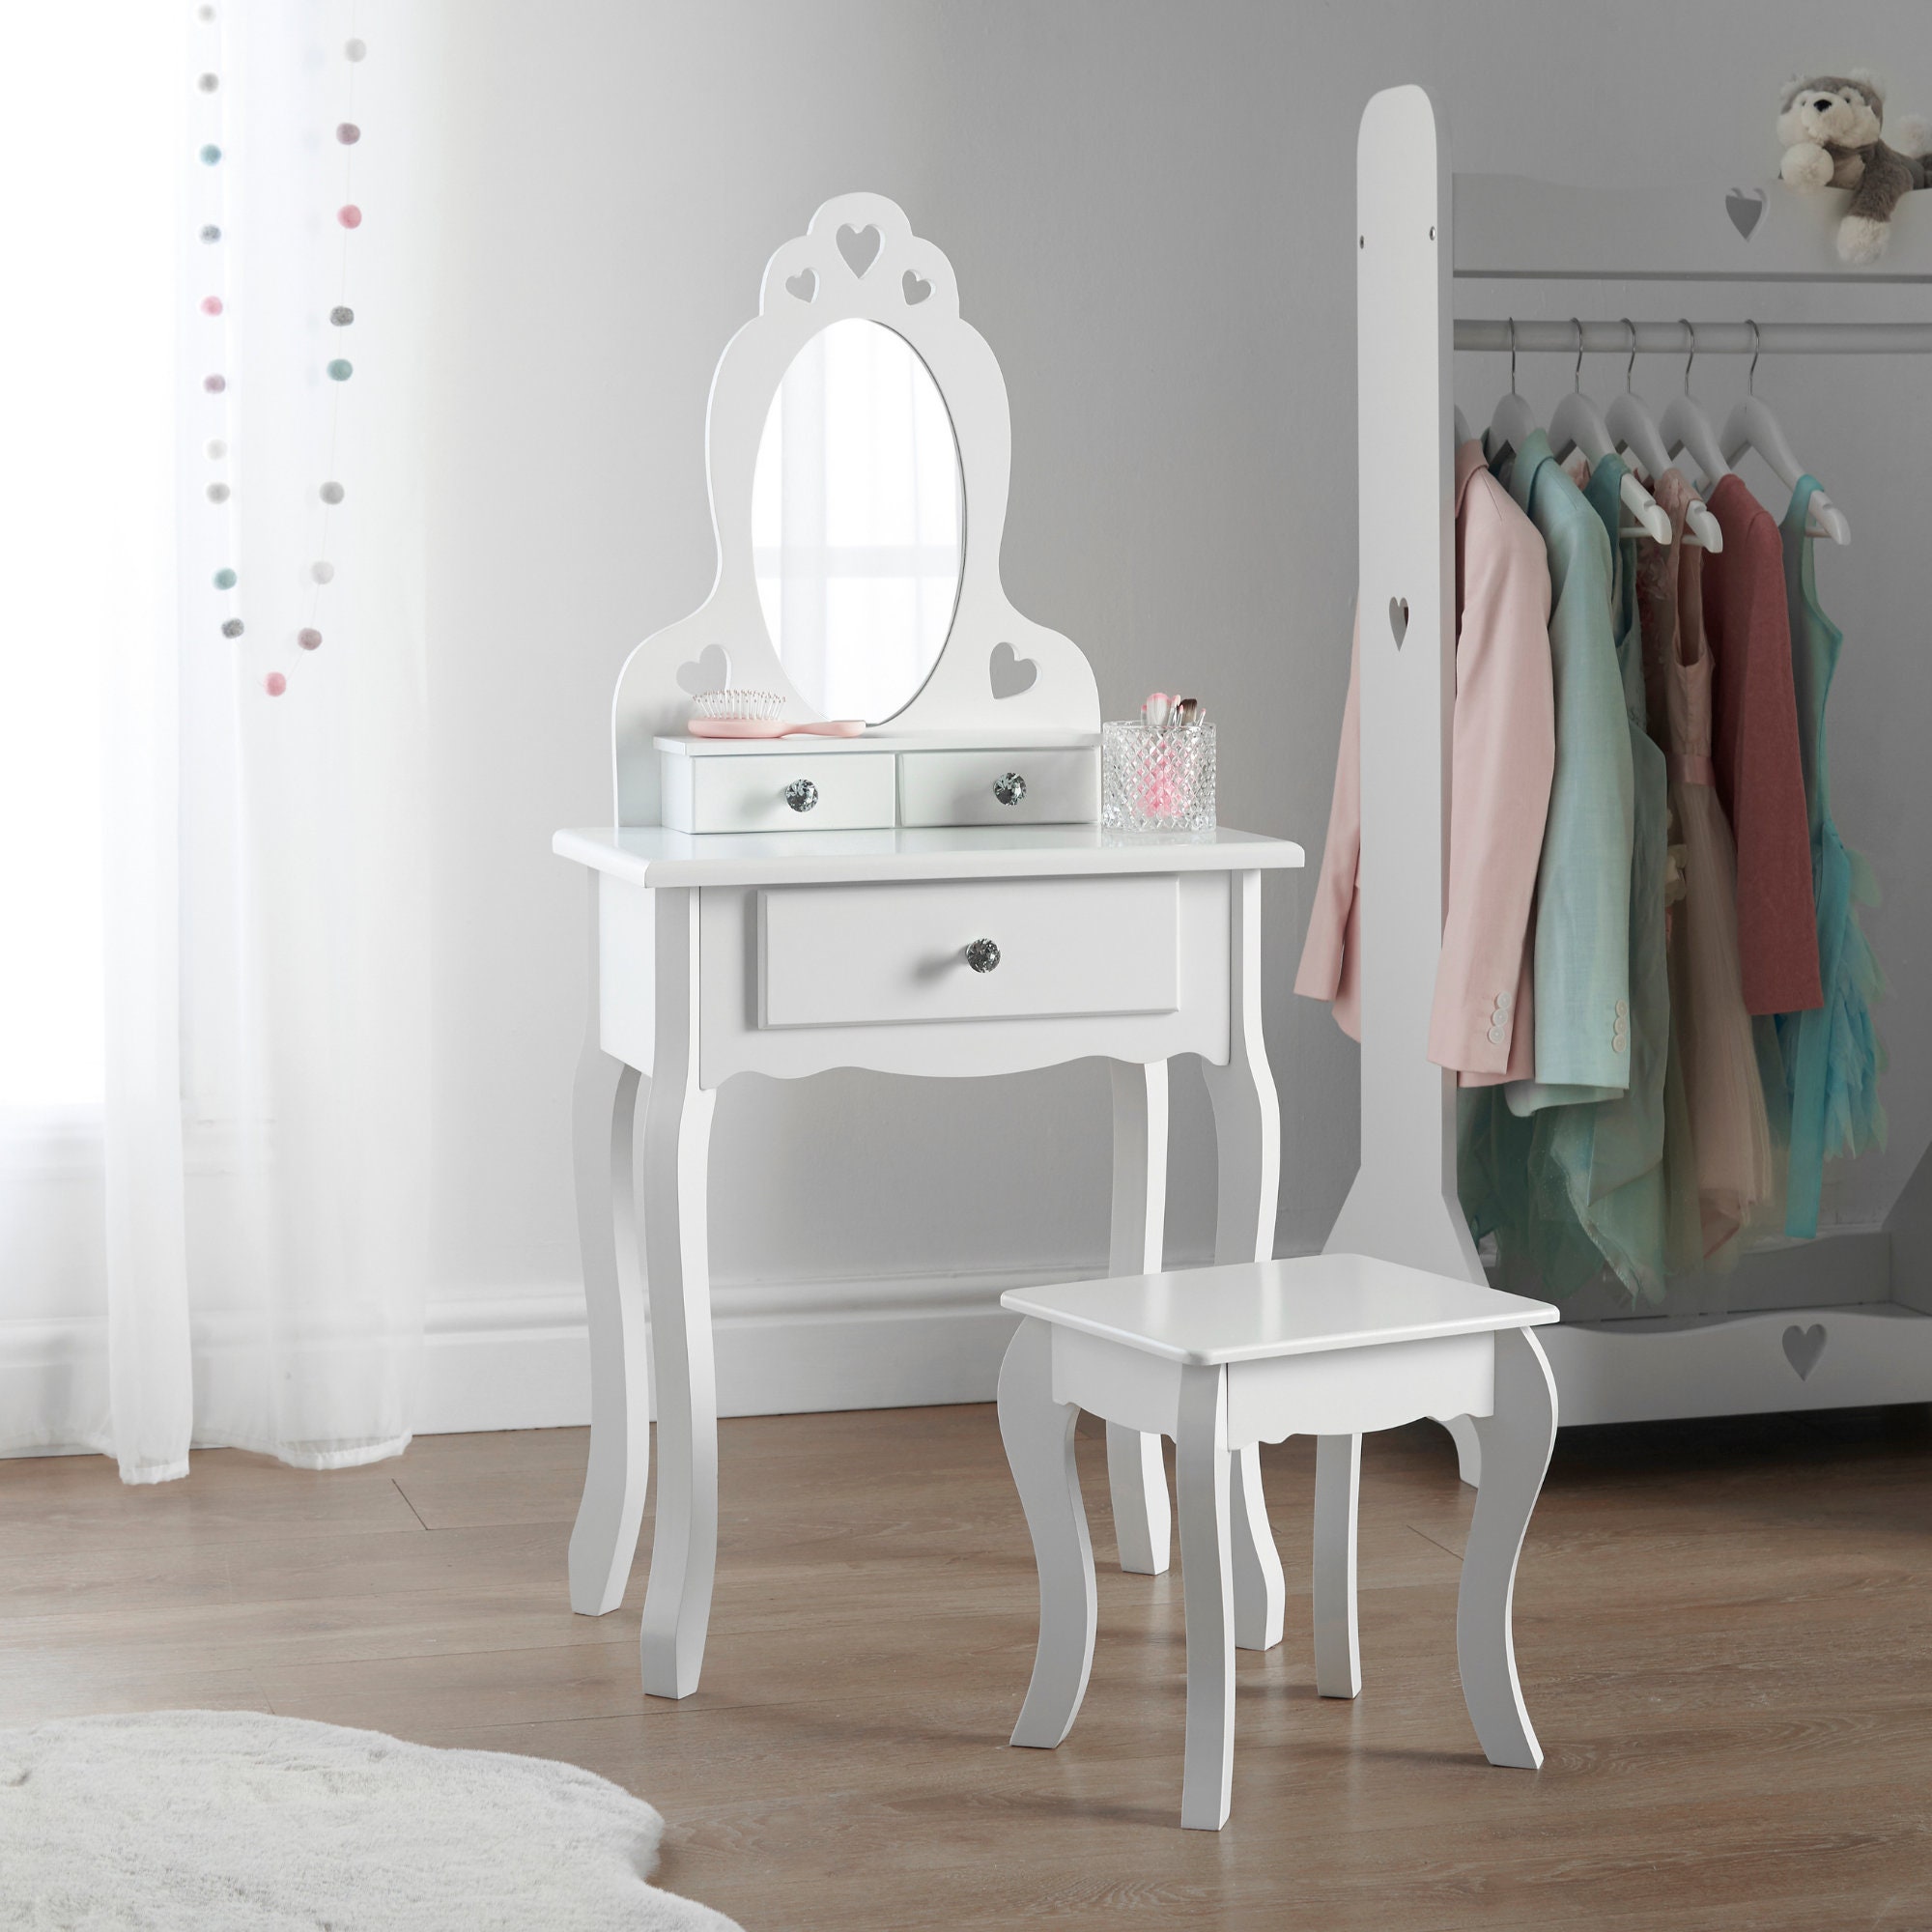 Dressing Table With Stool And Mirror 3, White Wooden Vanity